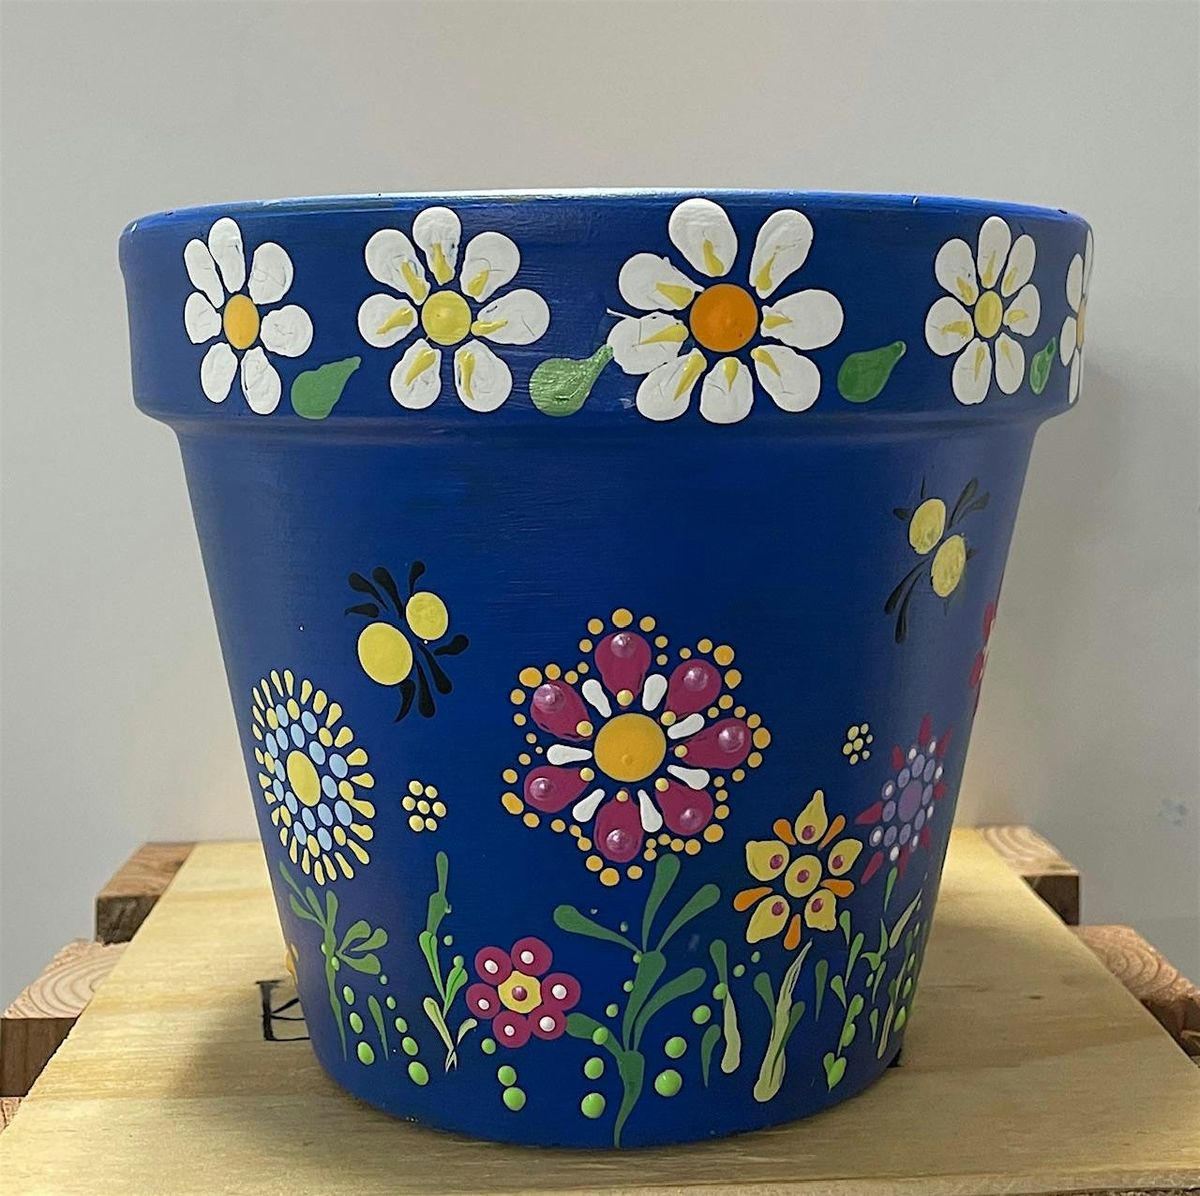 Painting planters with dots! Paint a terra cotta planter for Mothers day